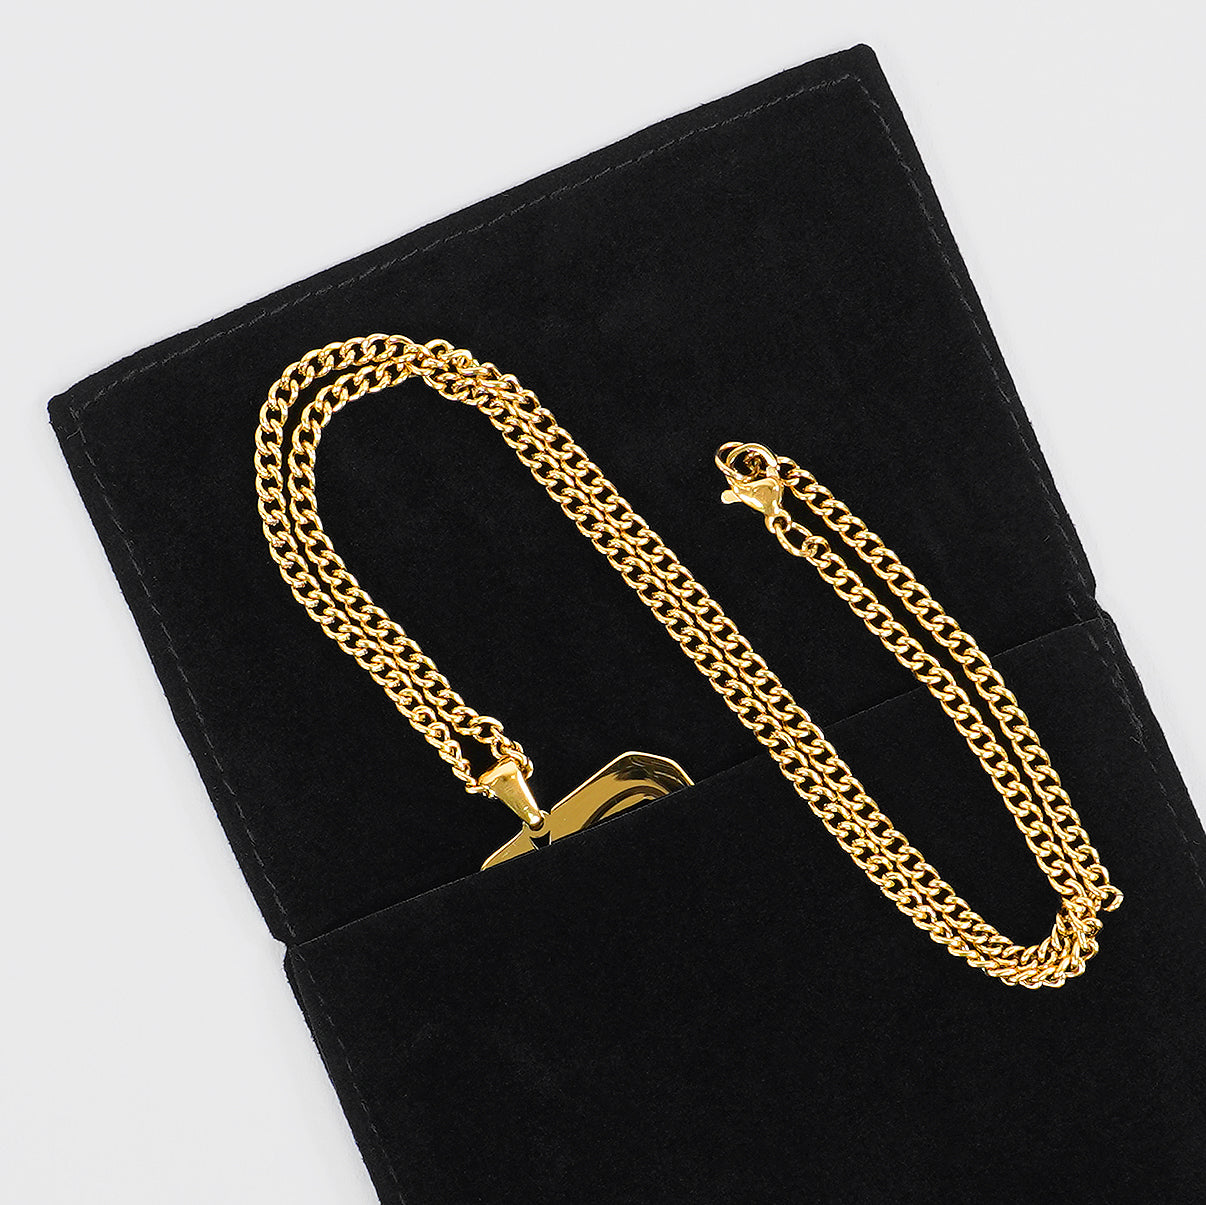 21 Number Pendant with Chain Necklace - Gold Plated Stainless Steel